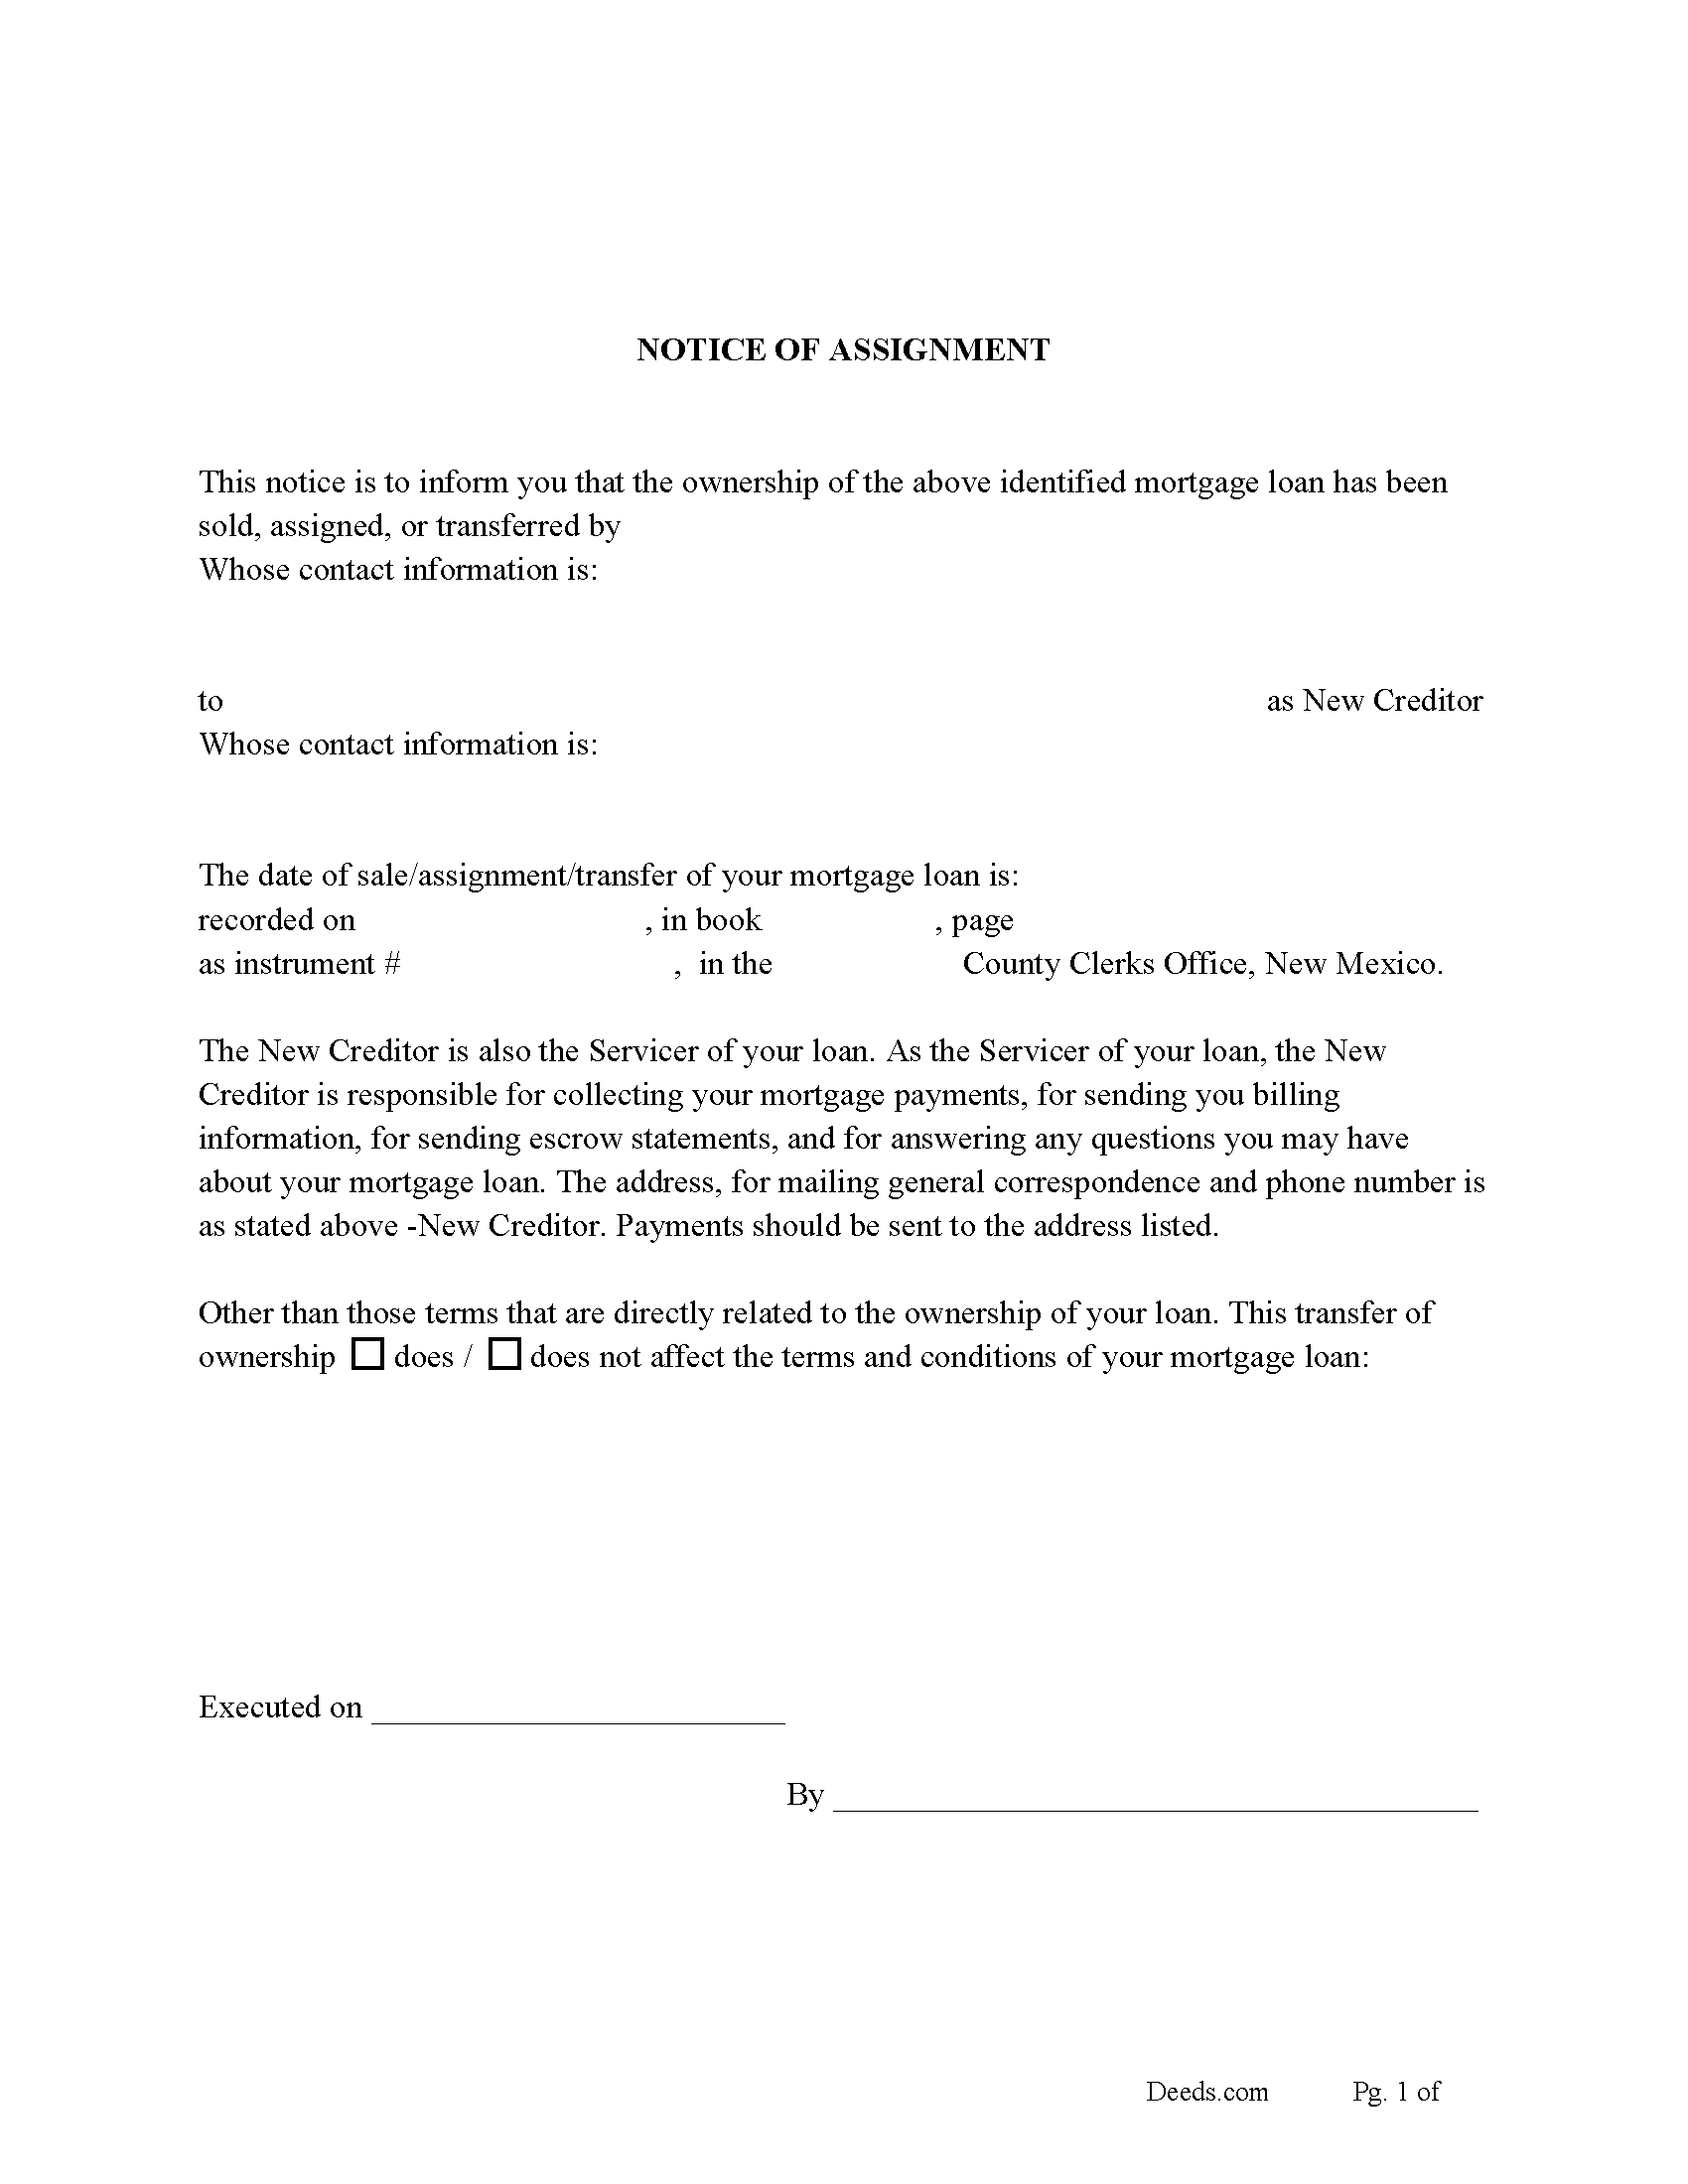 Rio Arriba County Notice of Assignment of Mortgage